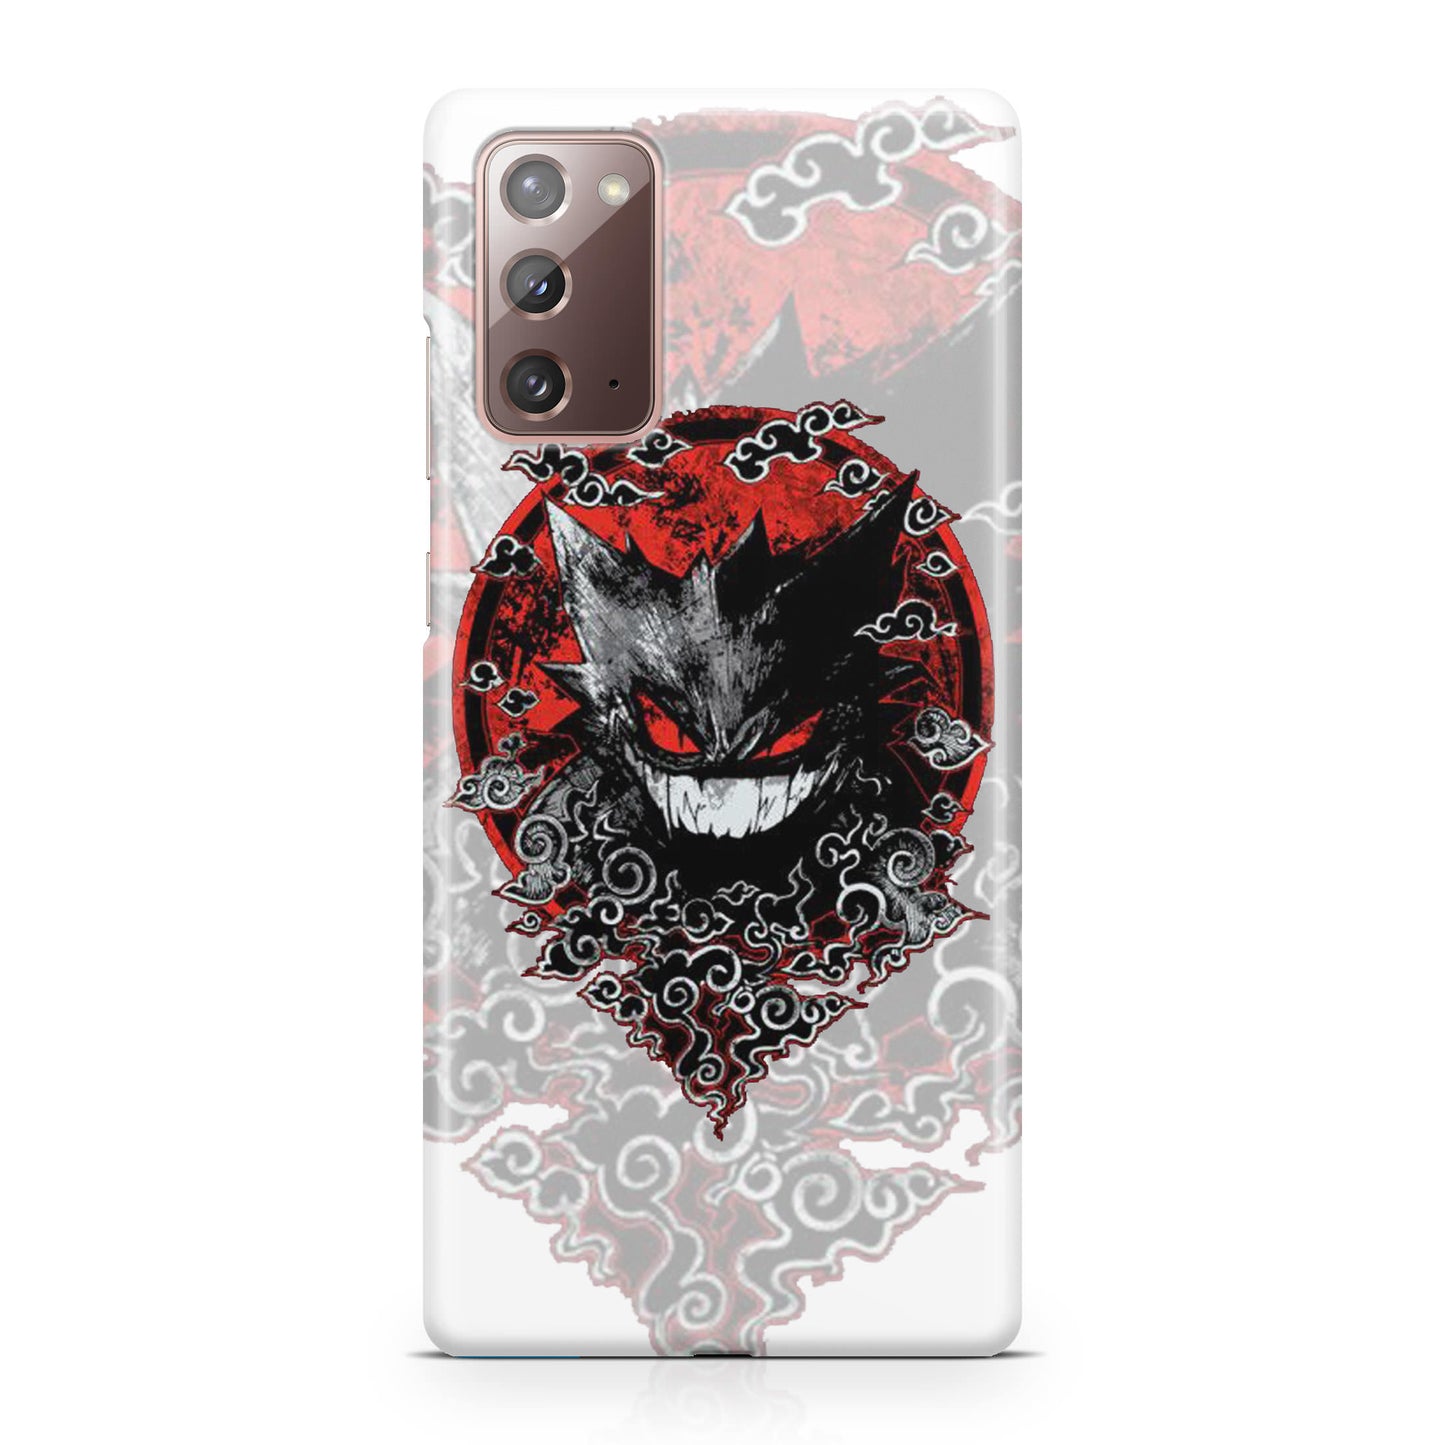 Gengar The Ghost Galaxy Note 20 Case